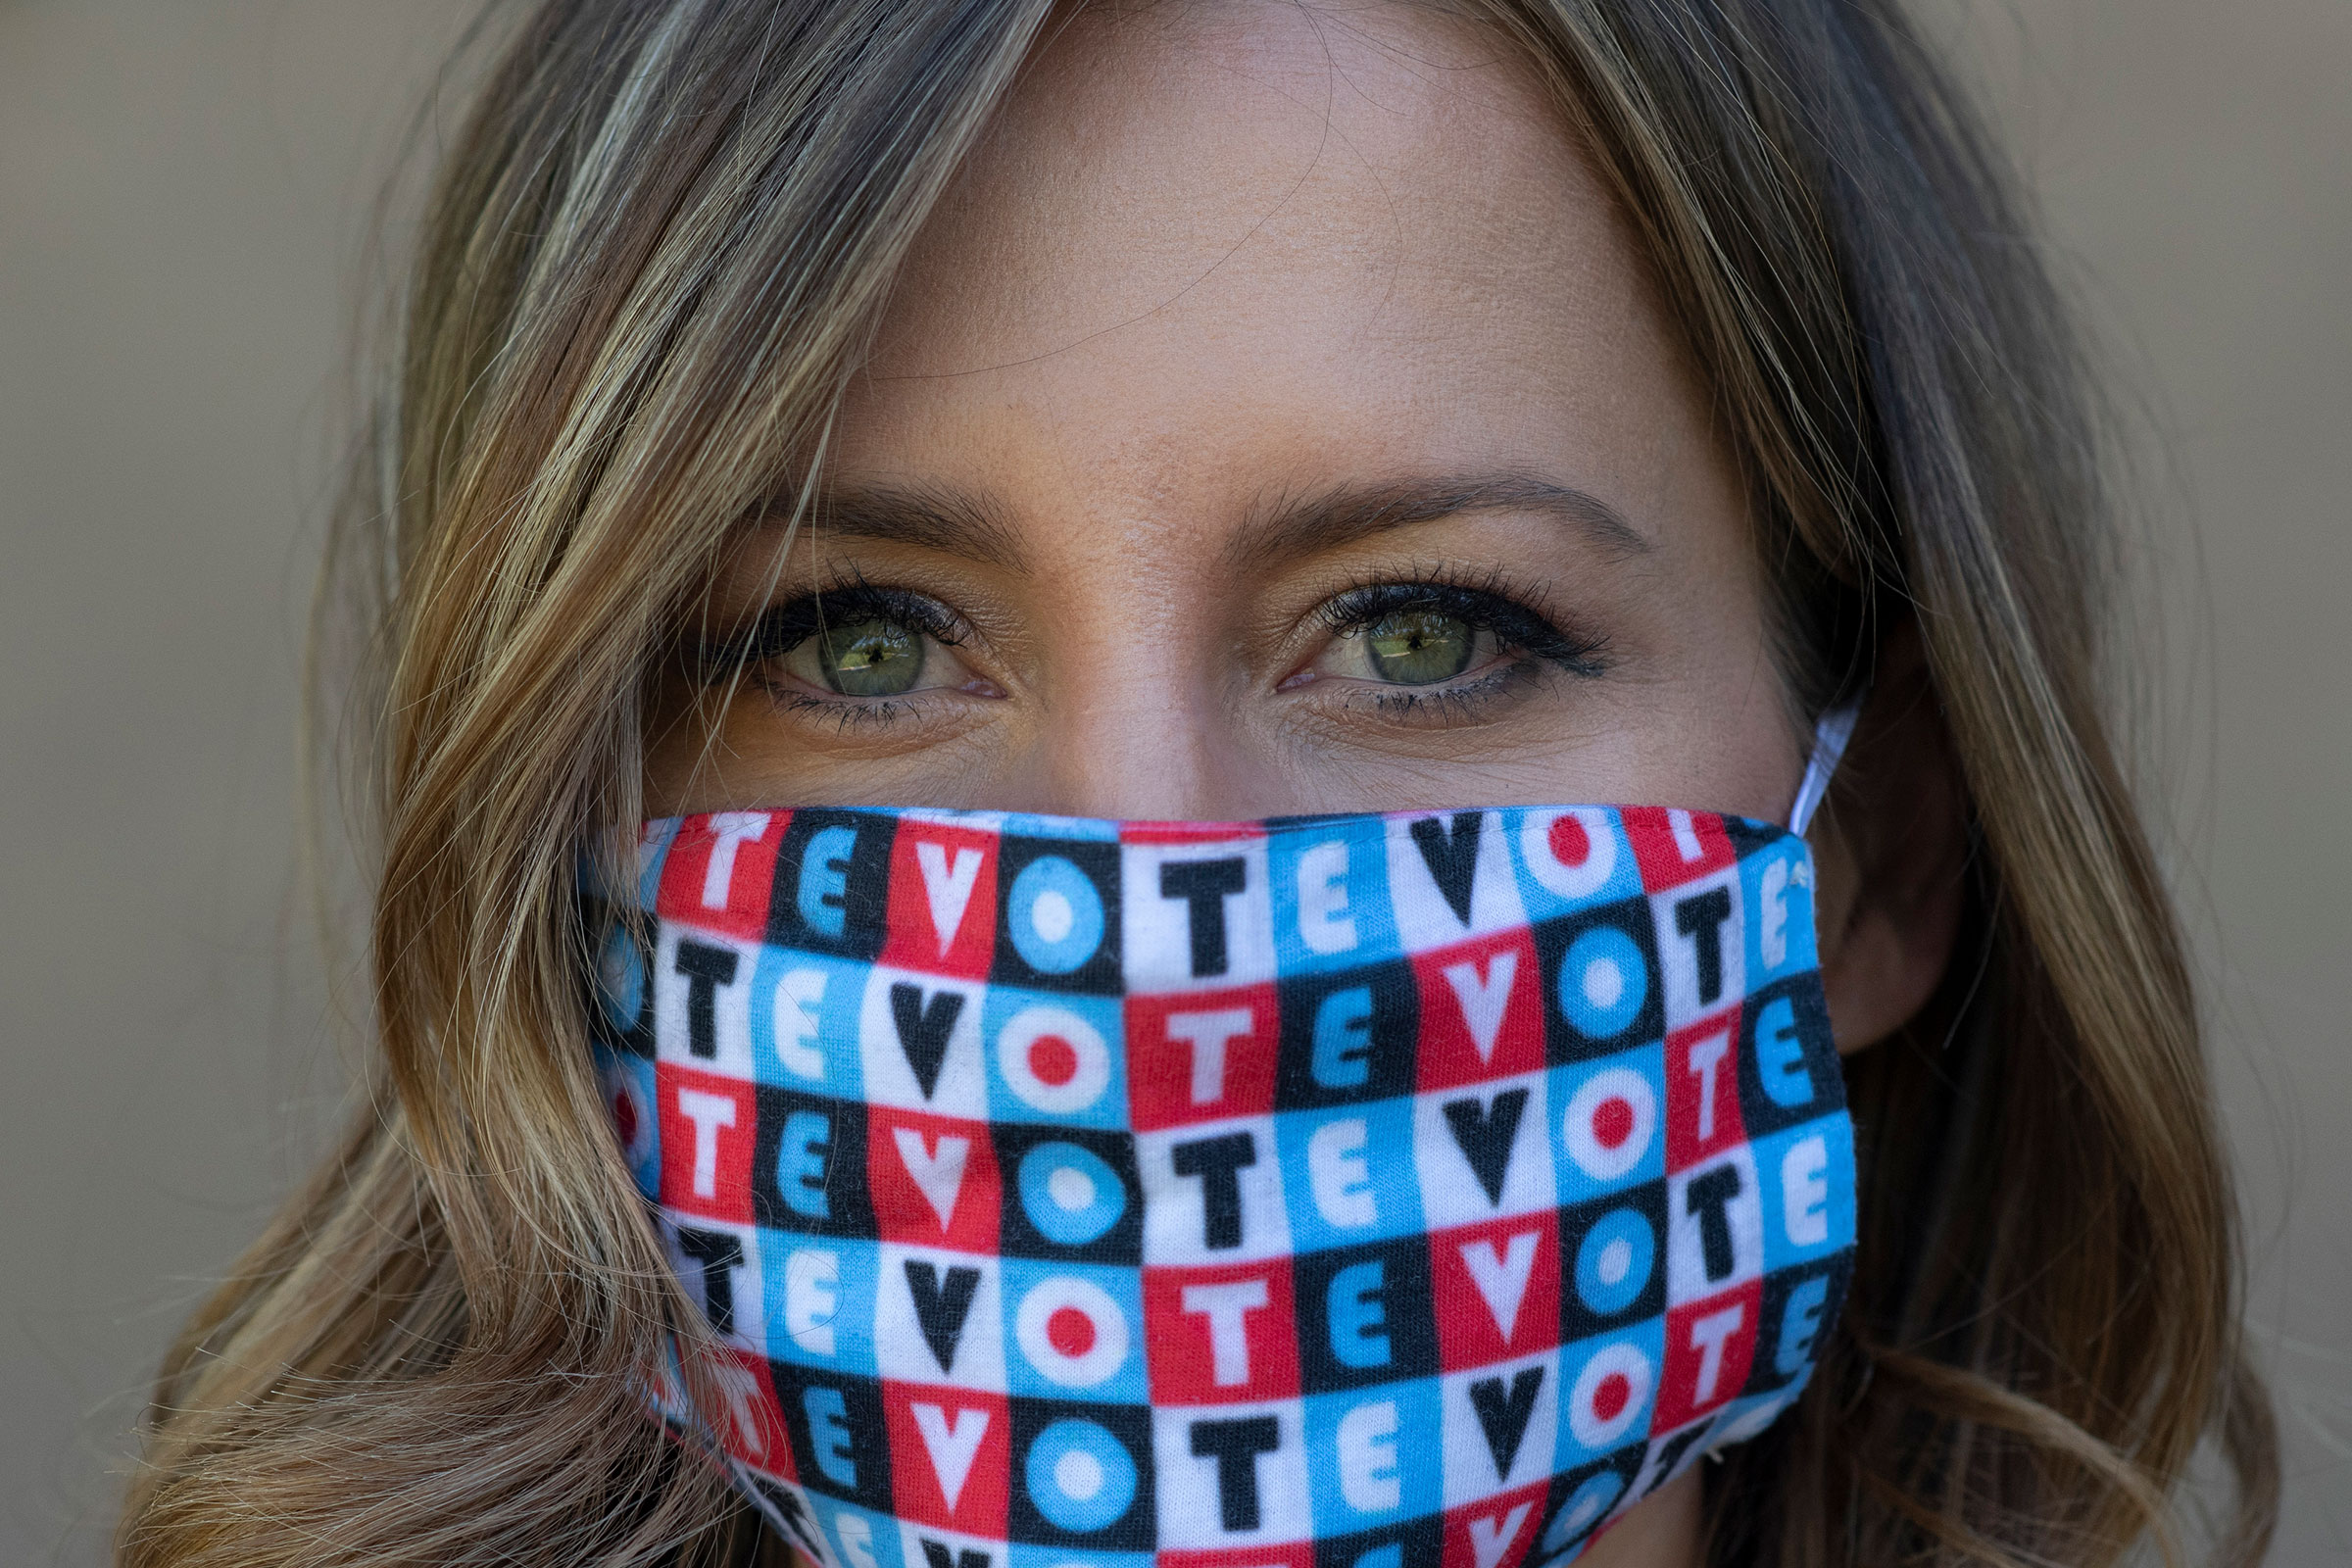 Amber McReynolds wearing a mask that says "vote" on Sept. 29, 2020. (Rachel Woolf for TIME)